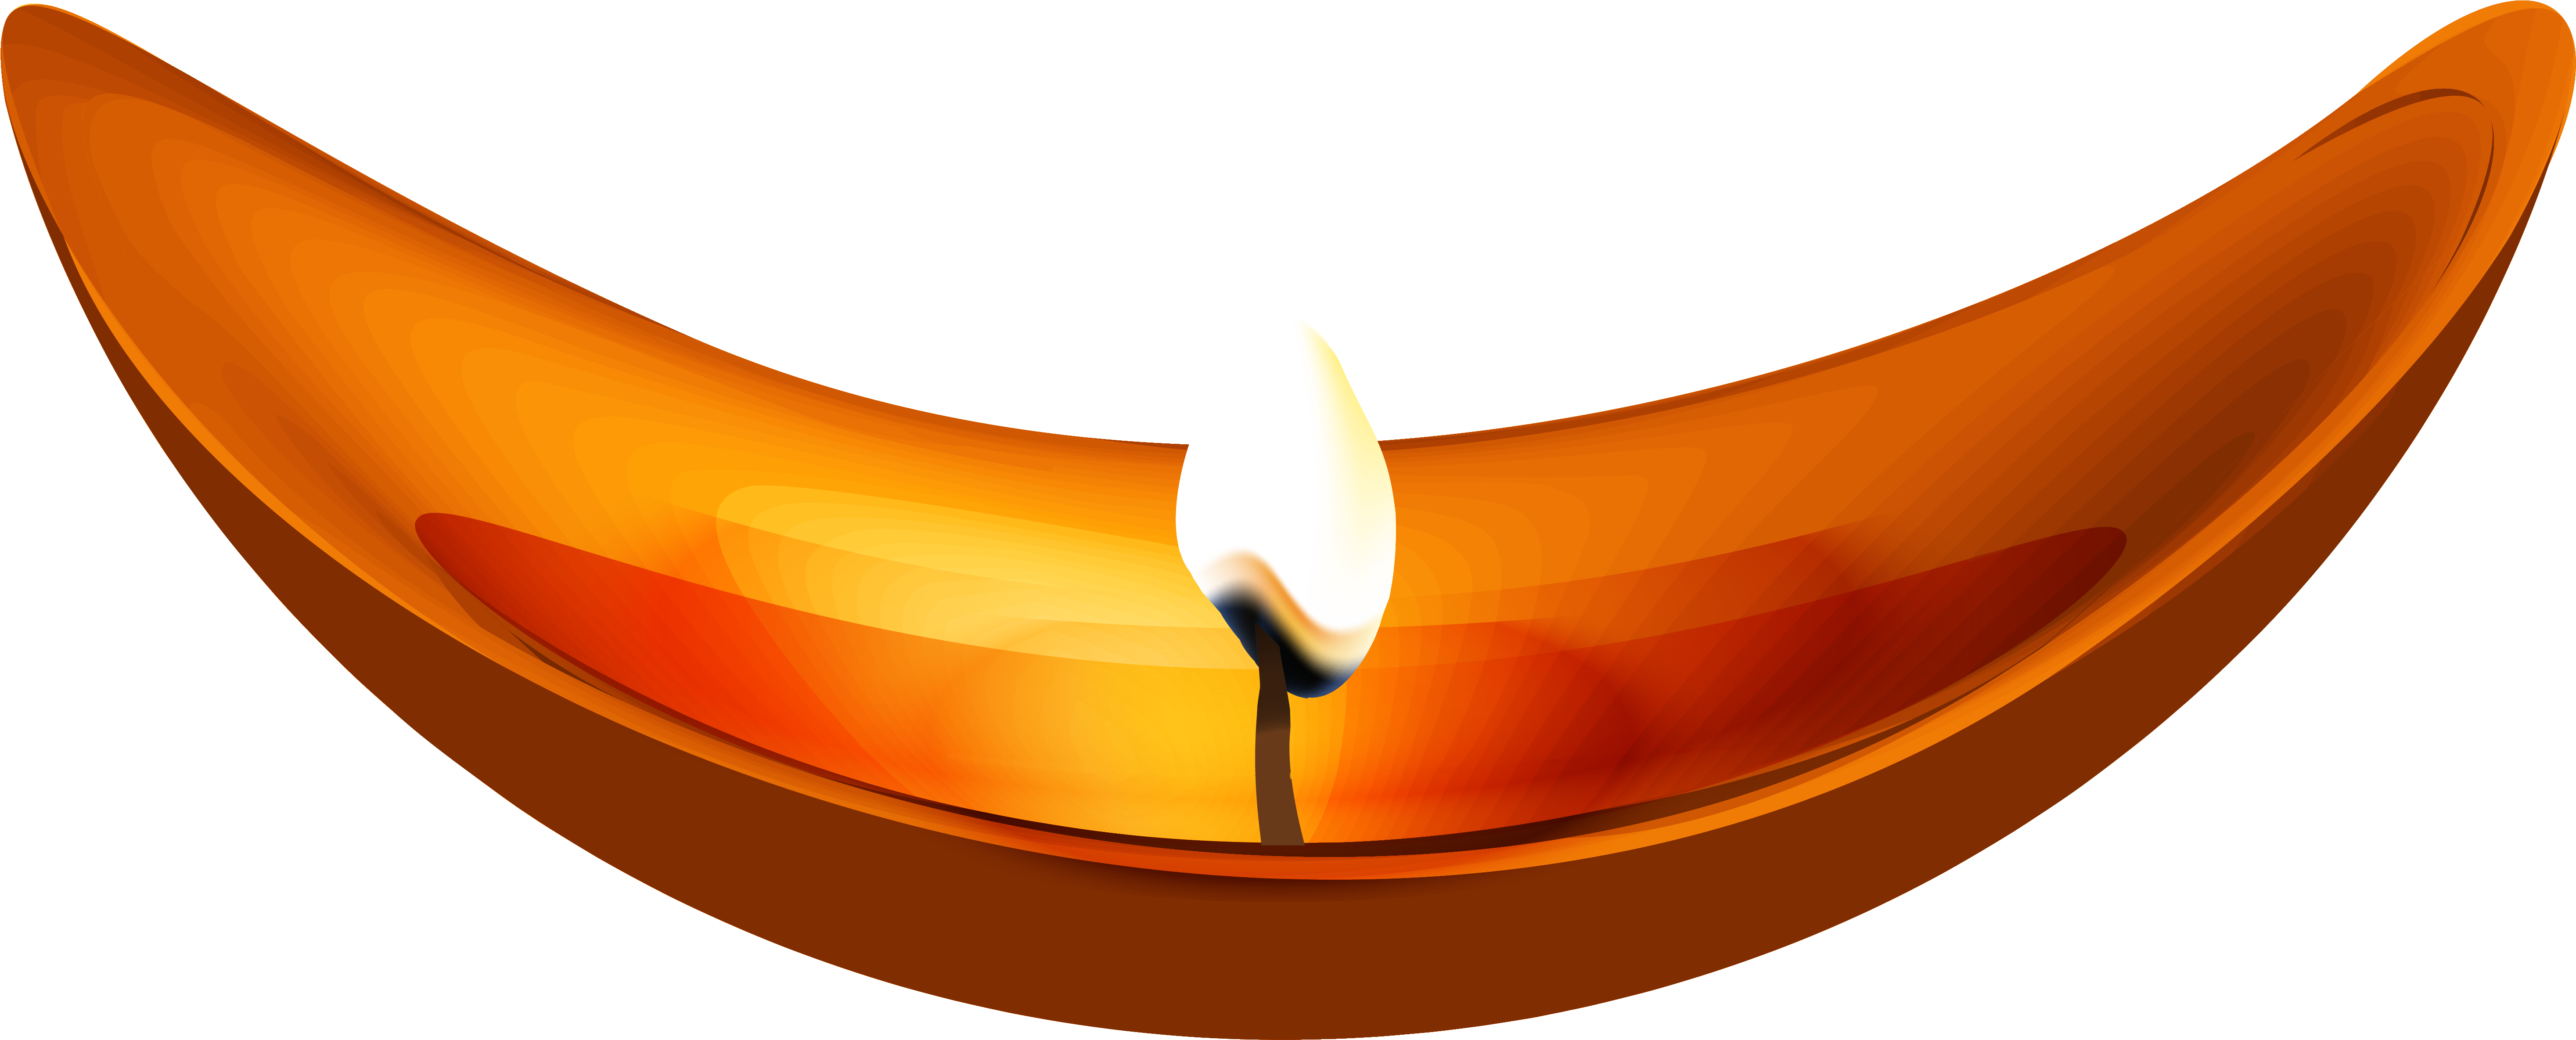 Download Happy Diwali Images Png PNG Image with No Background 